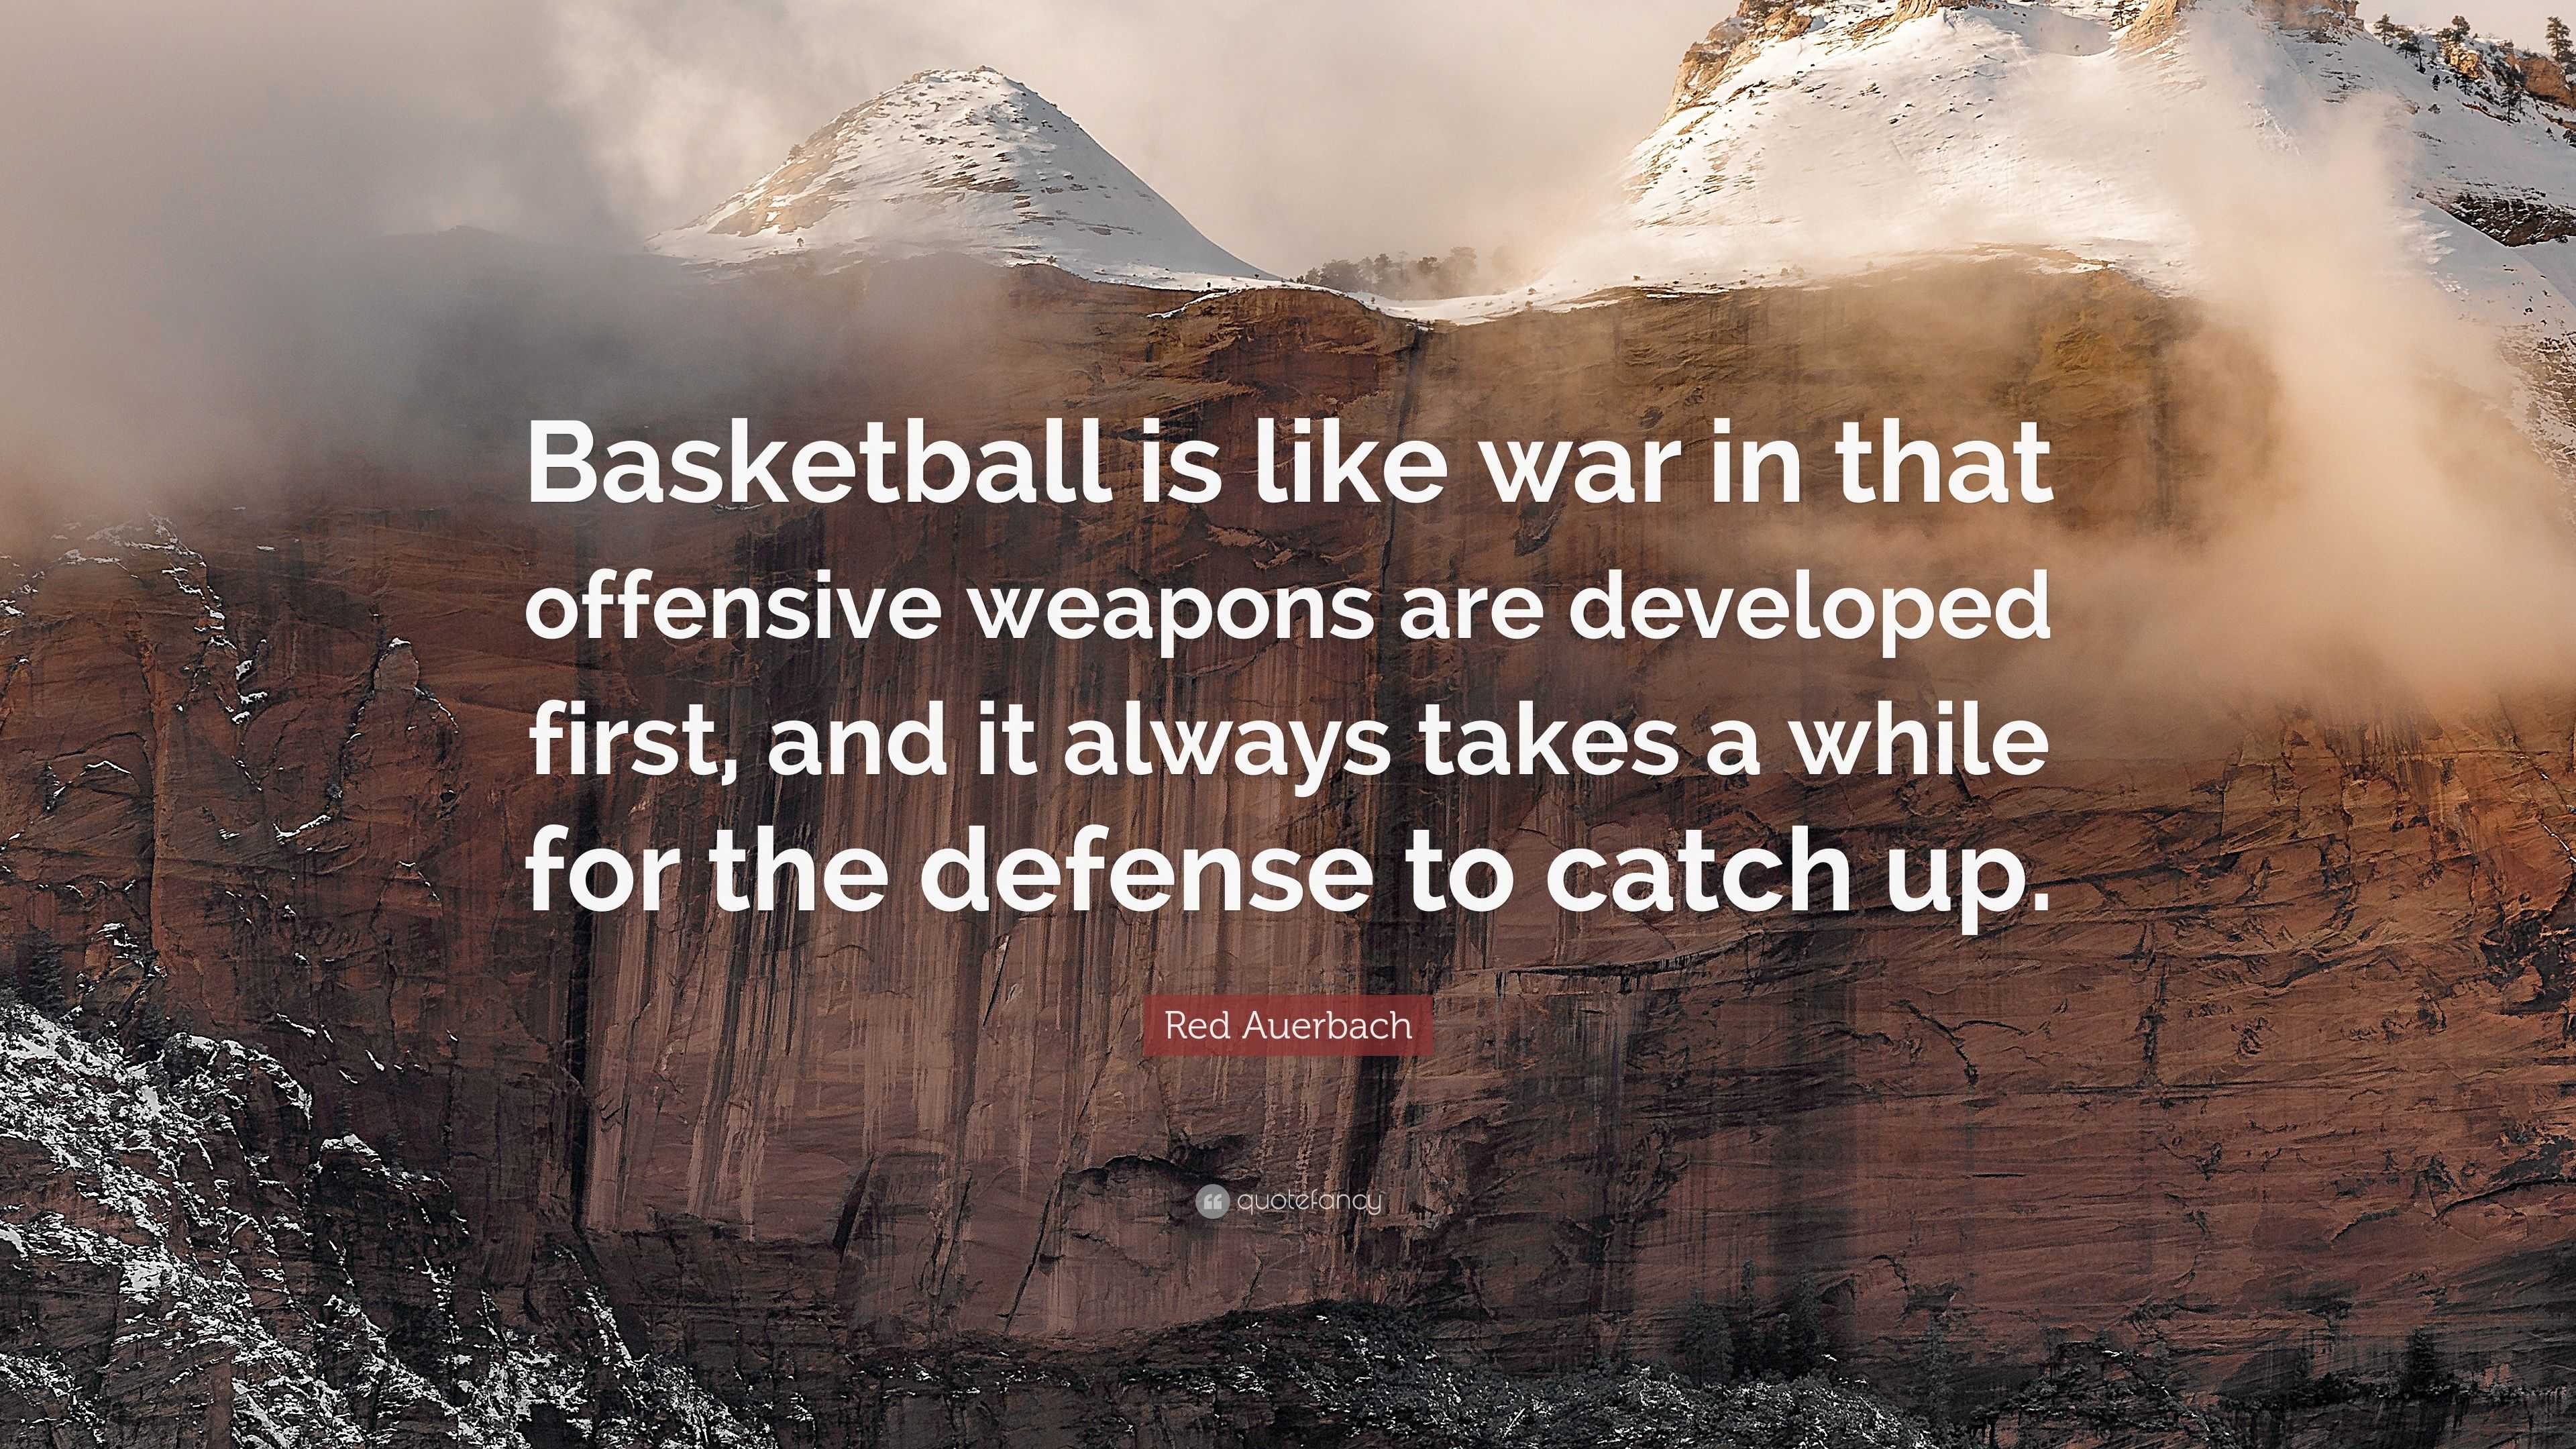 Red Auerbach Quote “Basketball is like war in that offensive weapons are developed first